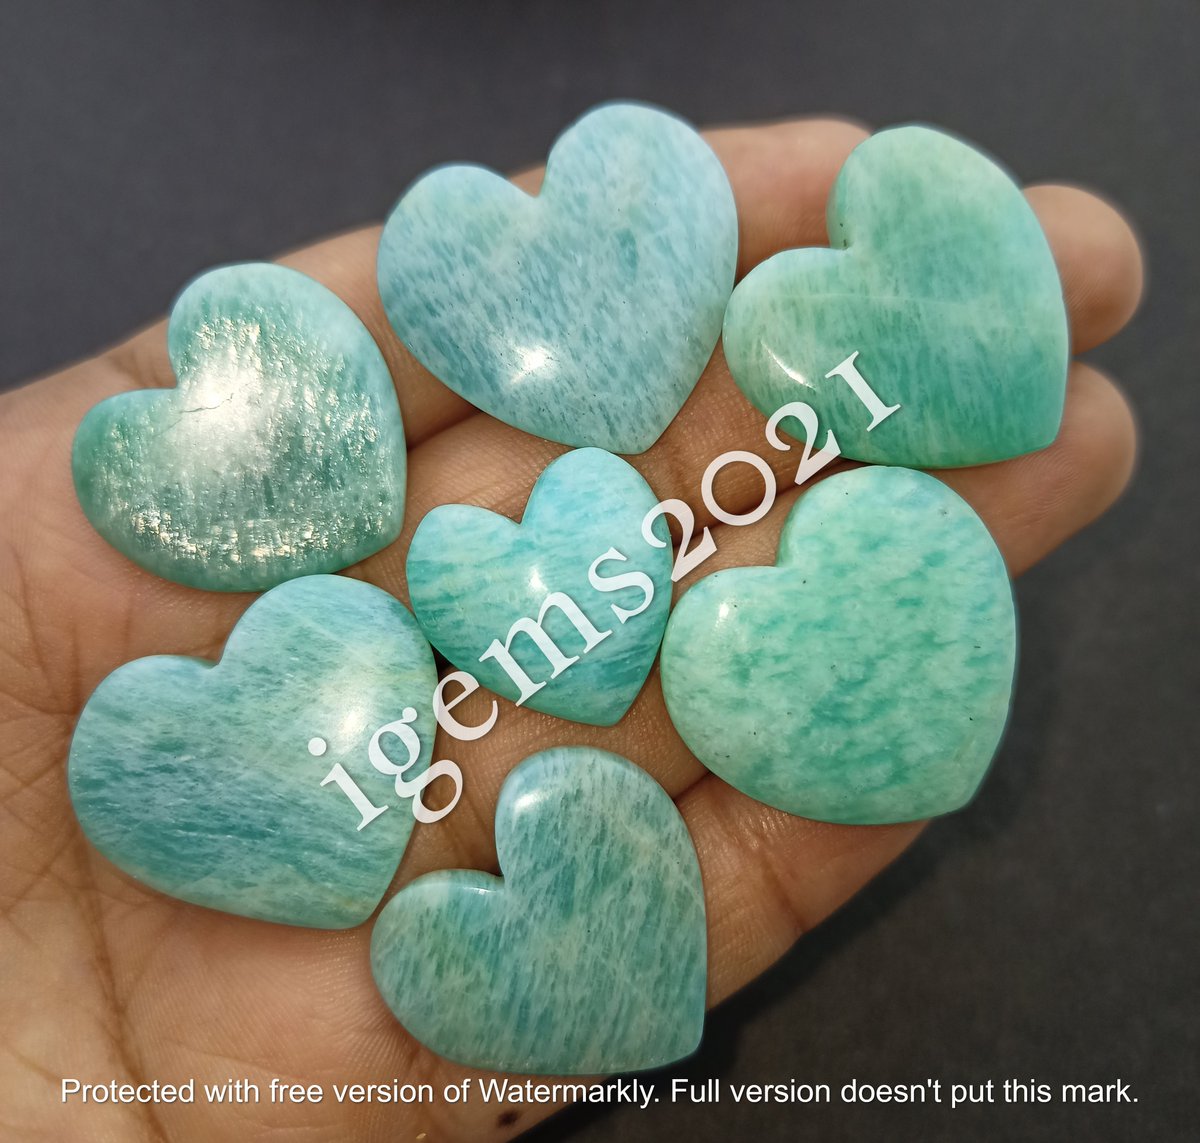 Natural Amazonite Eye Heart Stone Cabochon Gemstone 

$6 Each, Random Pick
Shipping$6 Combine Shipping Available
Size: 15-30MM APPROX.
Free Drilling Service

#amazonite #amazoniteheart #heartstone #amazonitenecklace #amazoniteearrings #amazonitejewellery #amazonitebracelet